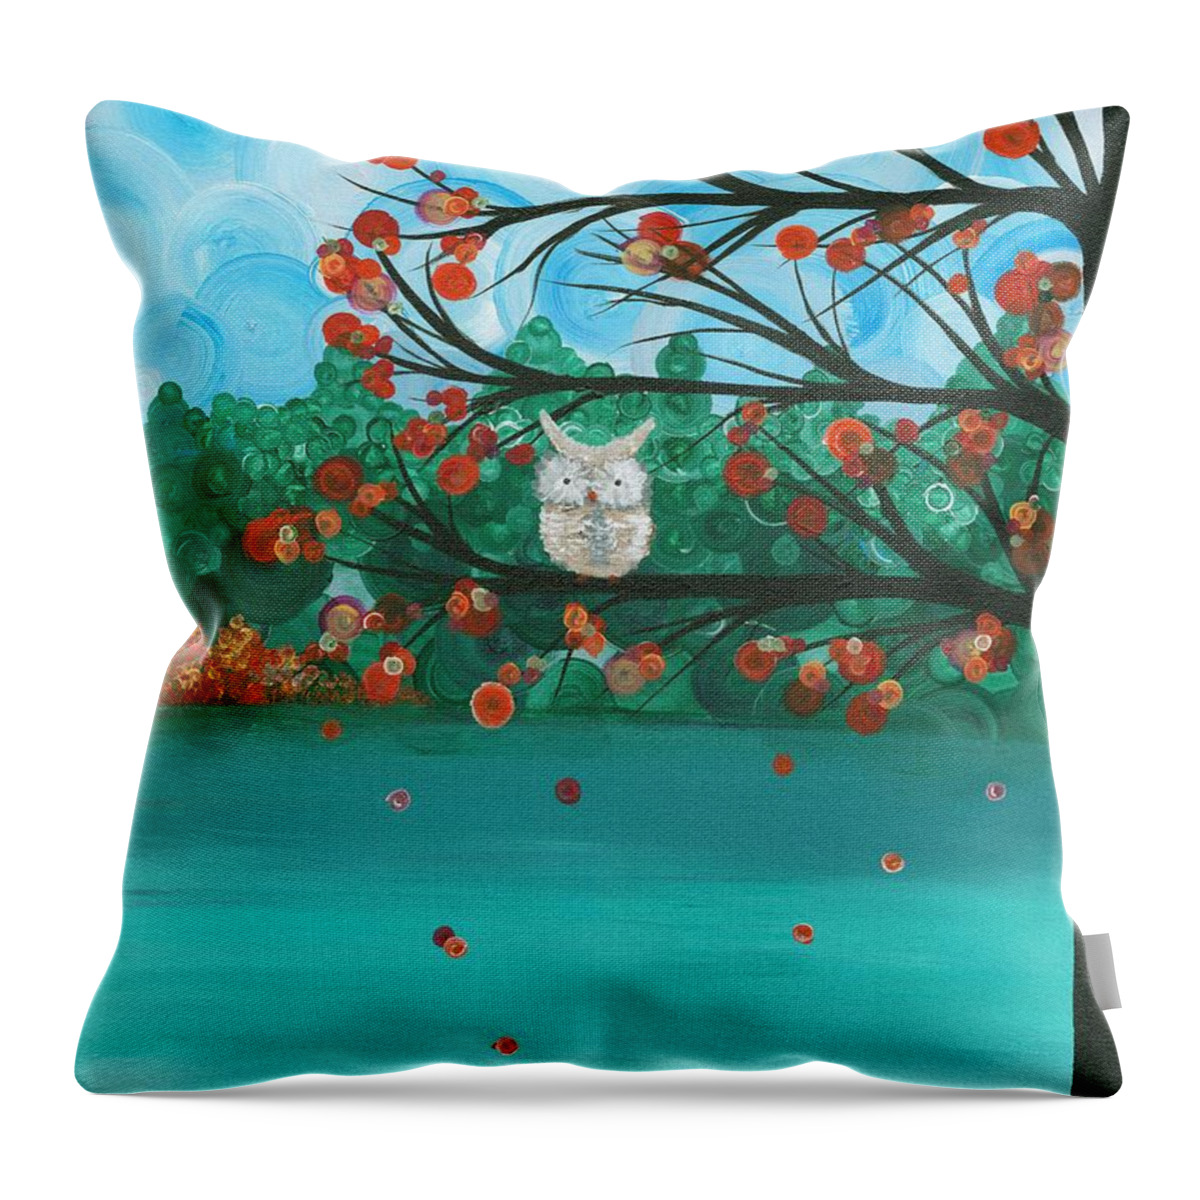 Owls Throw Pillow featuring the painting Hoolandia Seasons - Autumn by MiMi Stirn